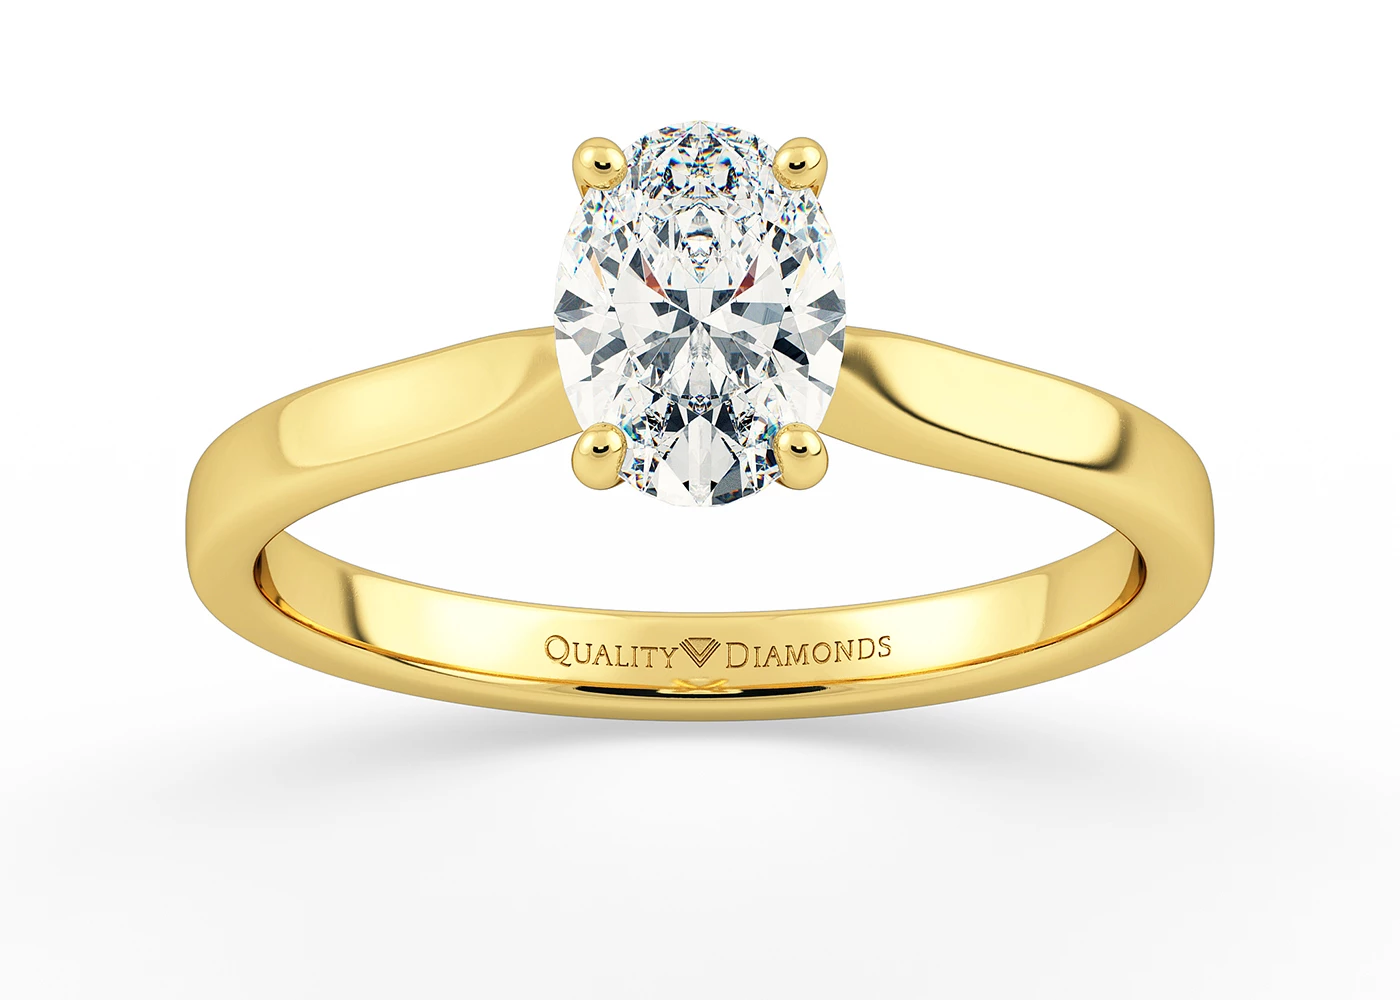 Oval Beau Diamond Ring in 18K Yellow Gold